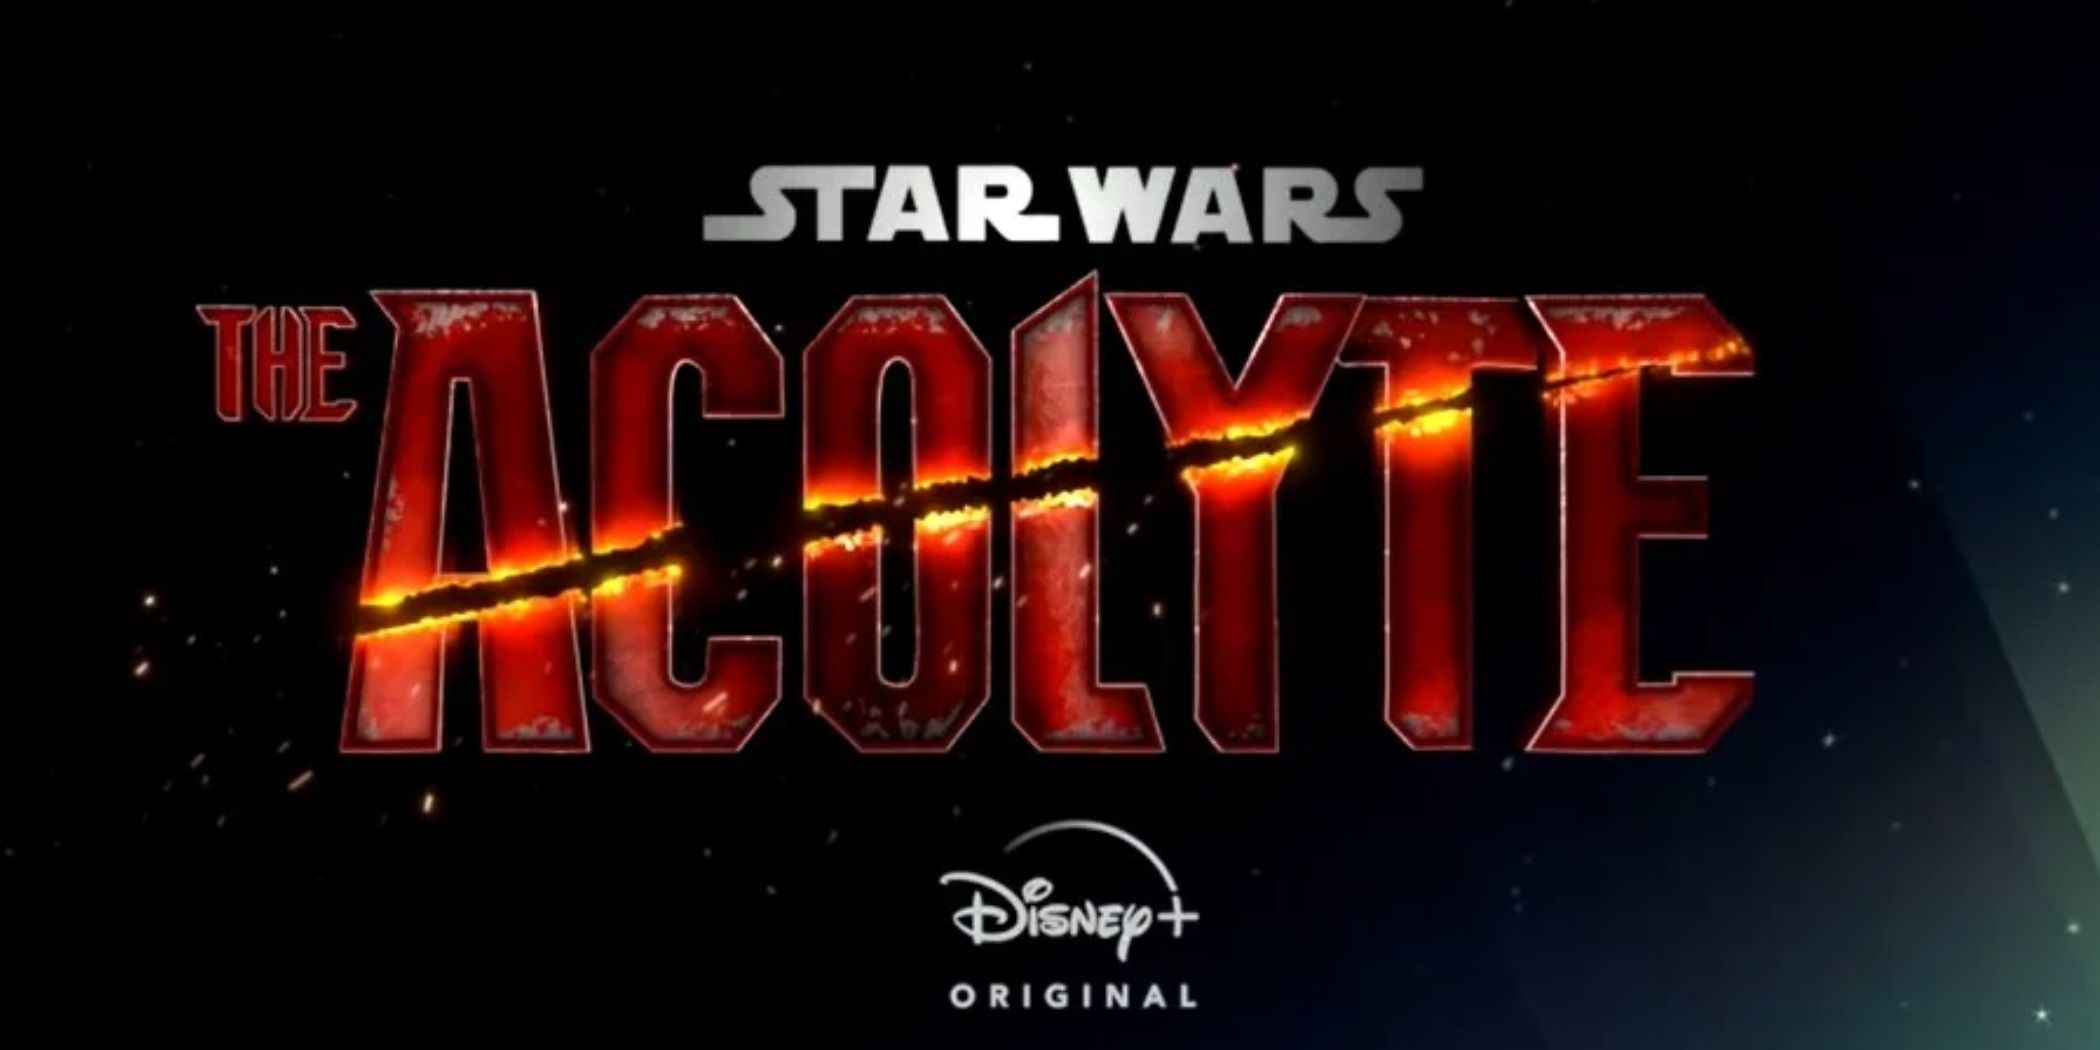 The logo for Star Wars The Acolyte